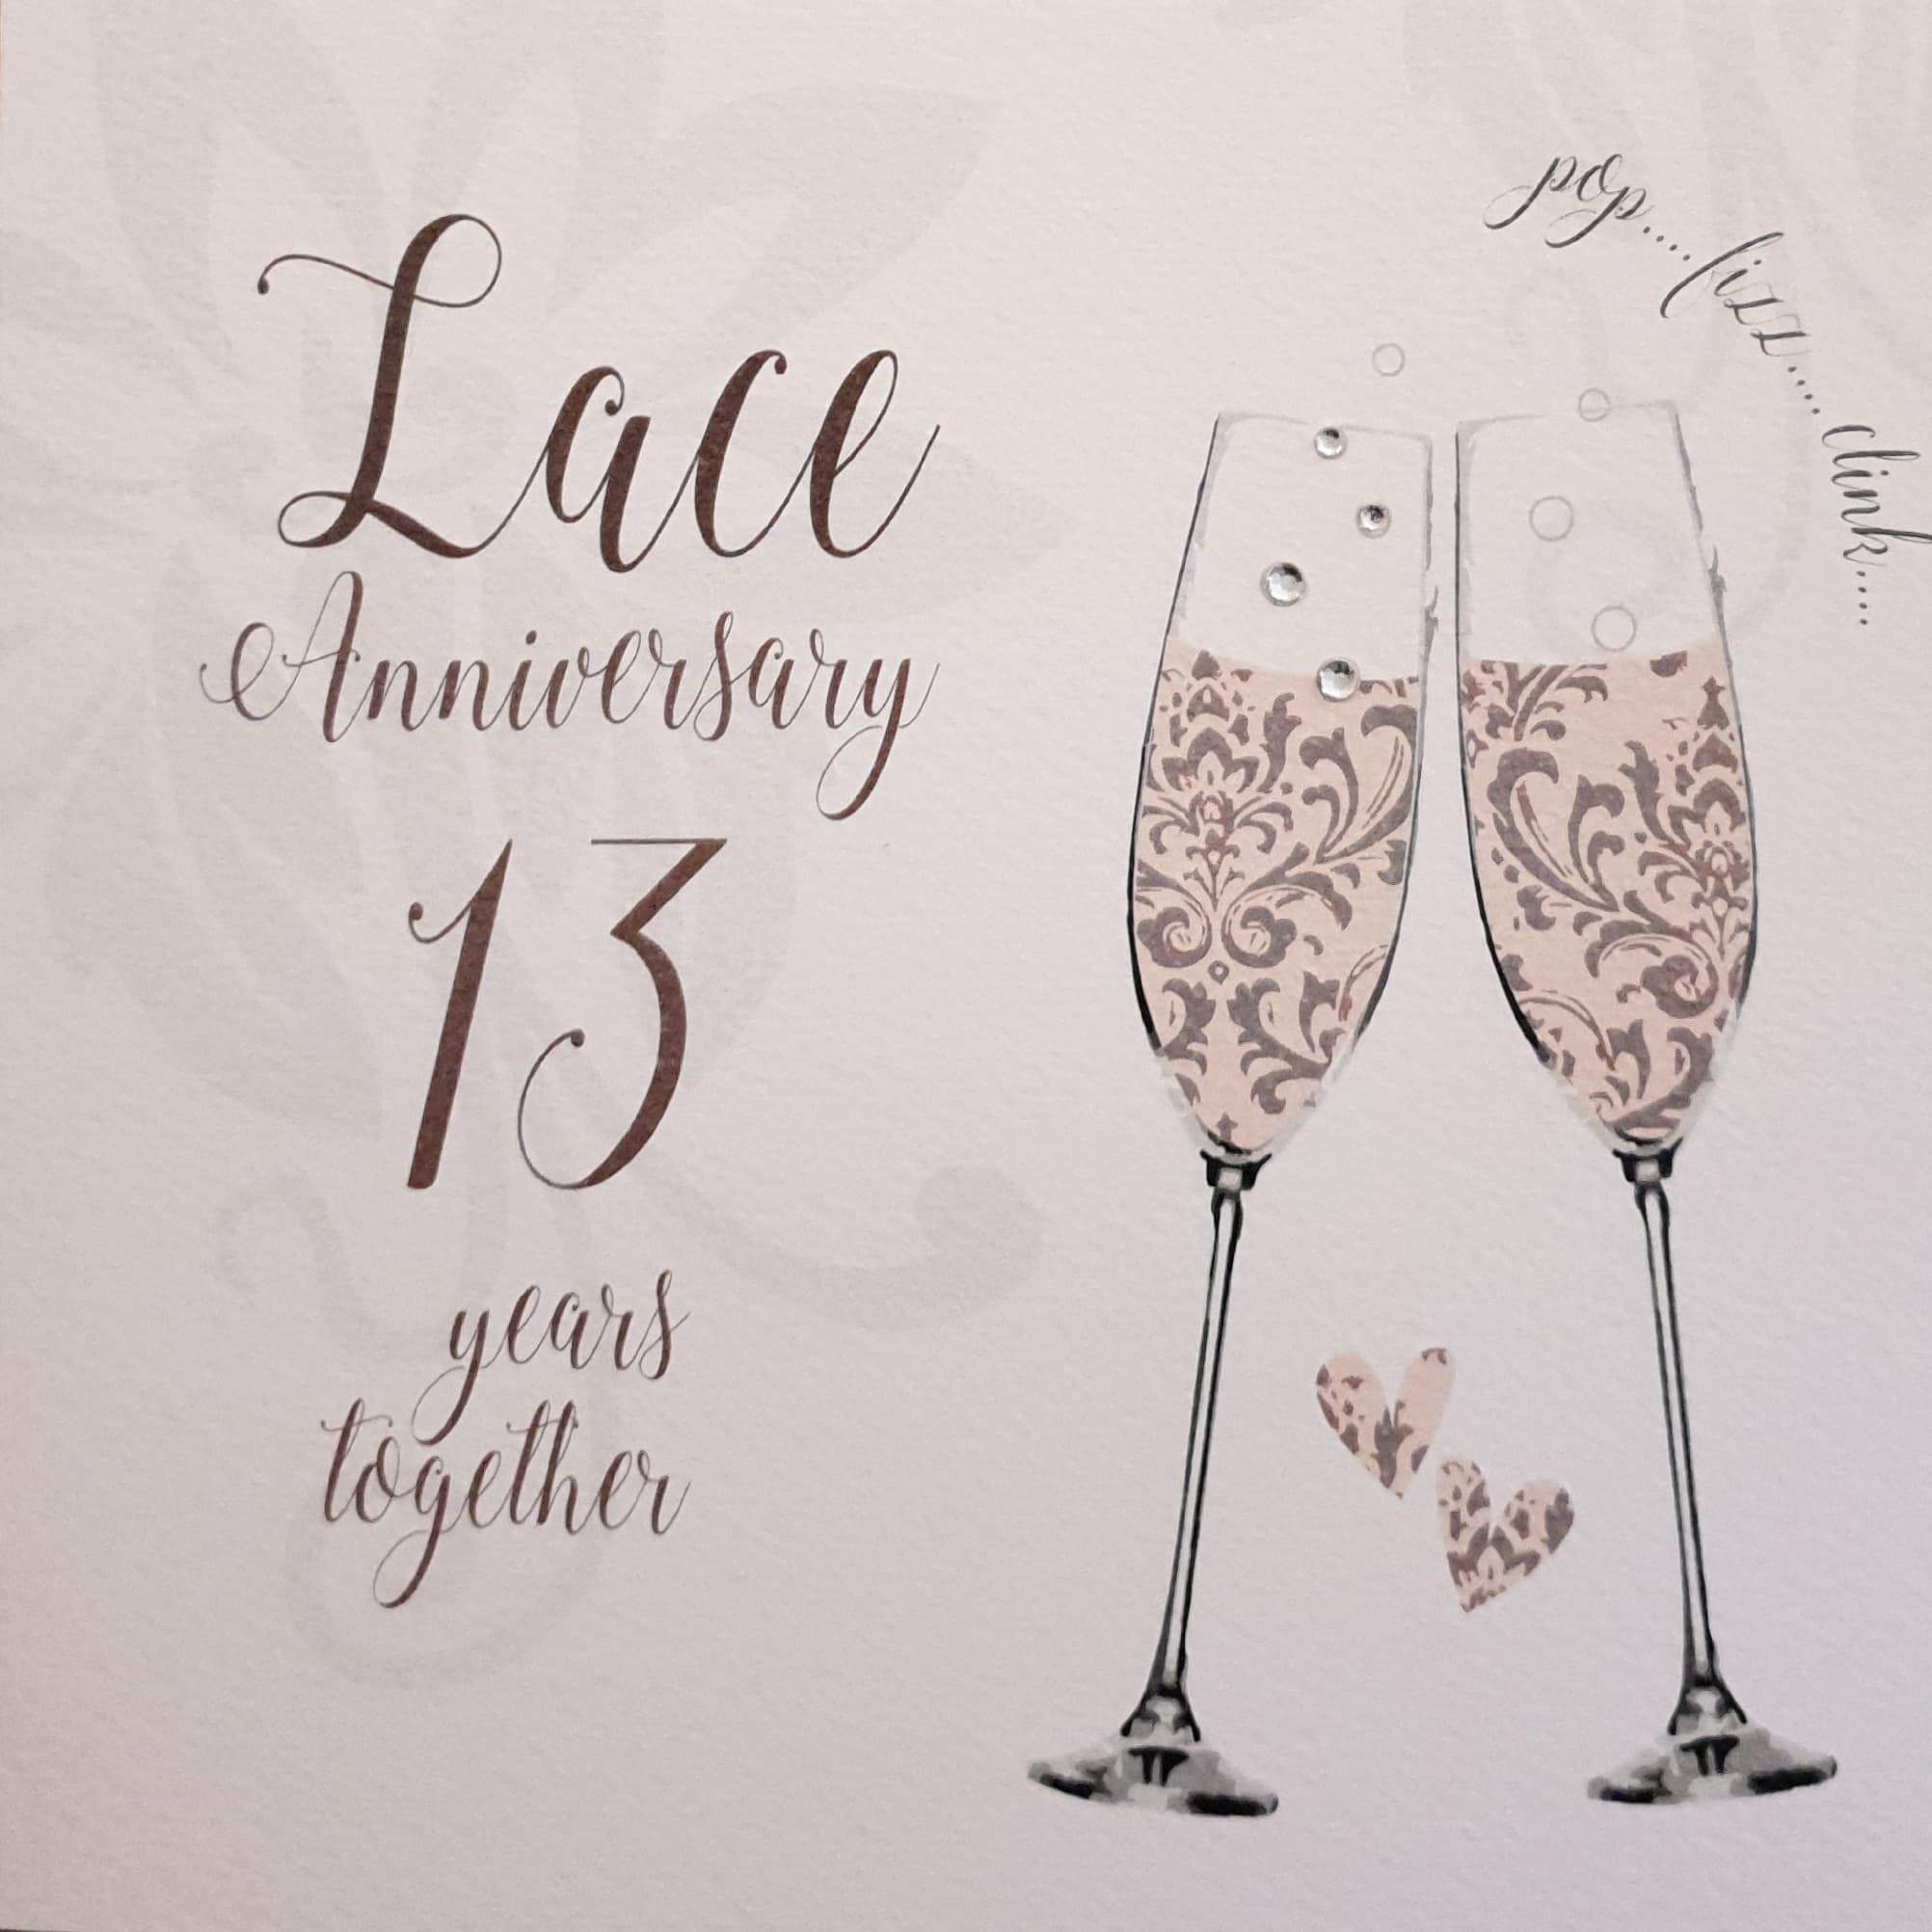 Anniversary Card - Lace Anniversary / 13 Years Together & Pink Champagne Glasses